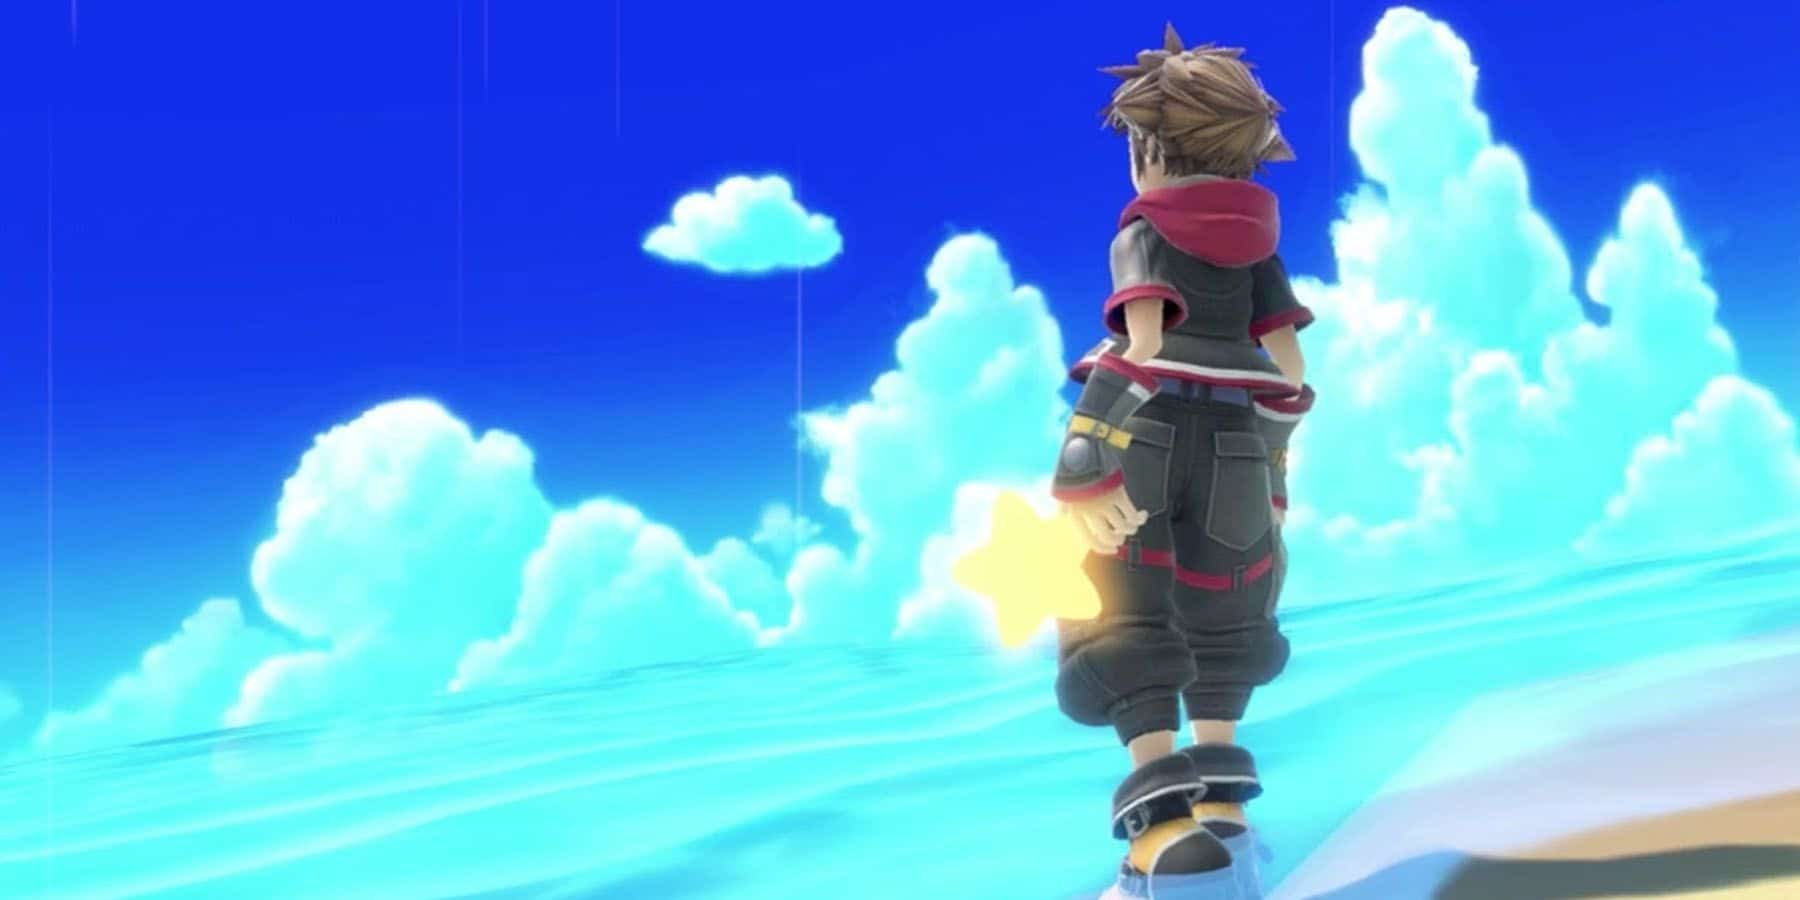 Kingdom Hearts creator was 'very picky' about Sora's inclusion in Smash